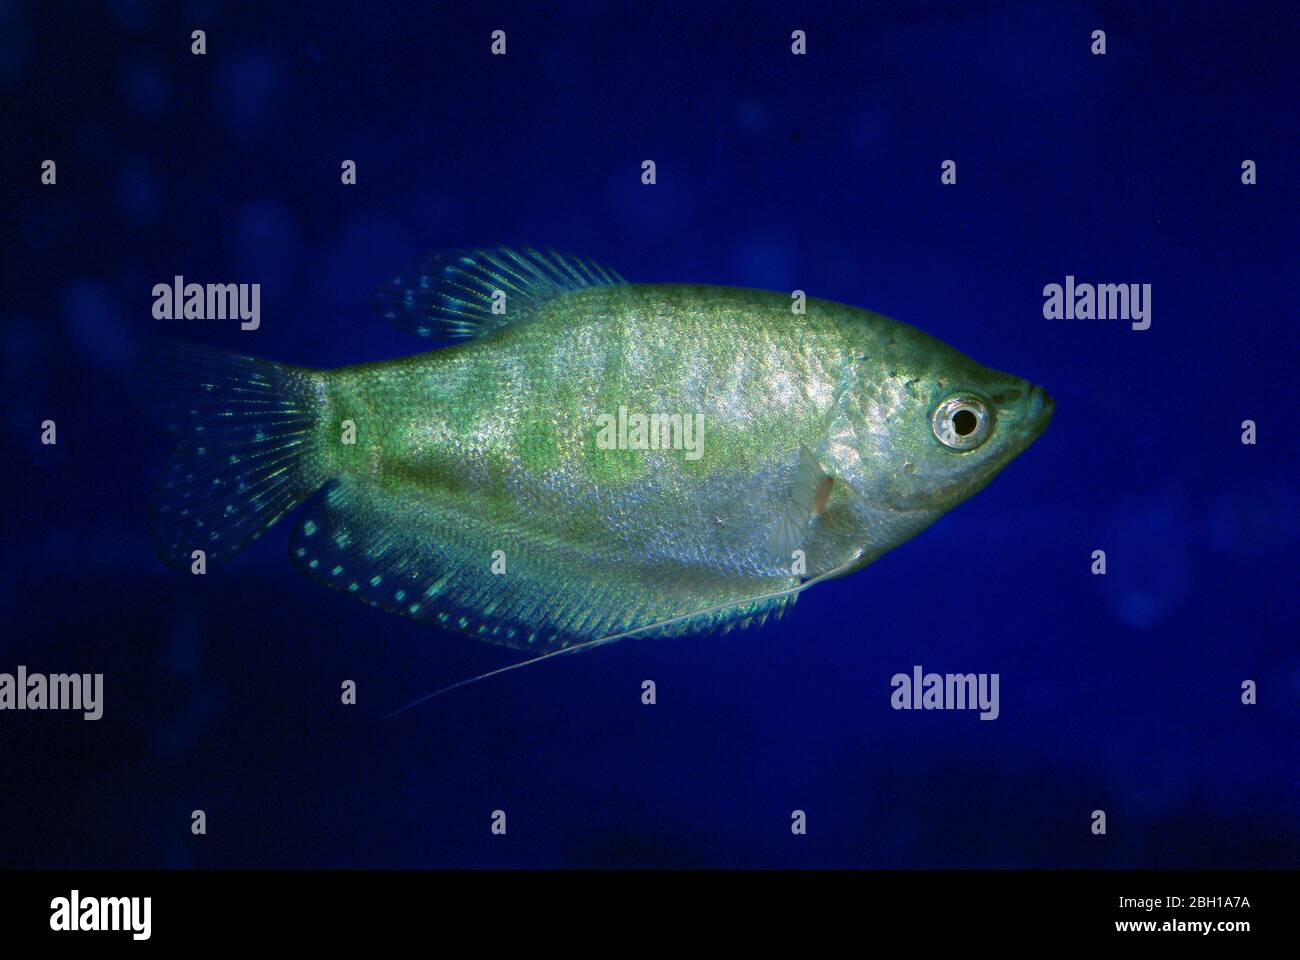 Three spot or Blue gourami (Trichopodus trichopterus), marble or "Cosby" var. Stock Photo